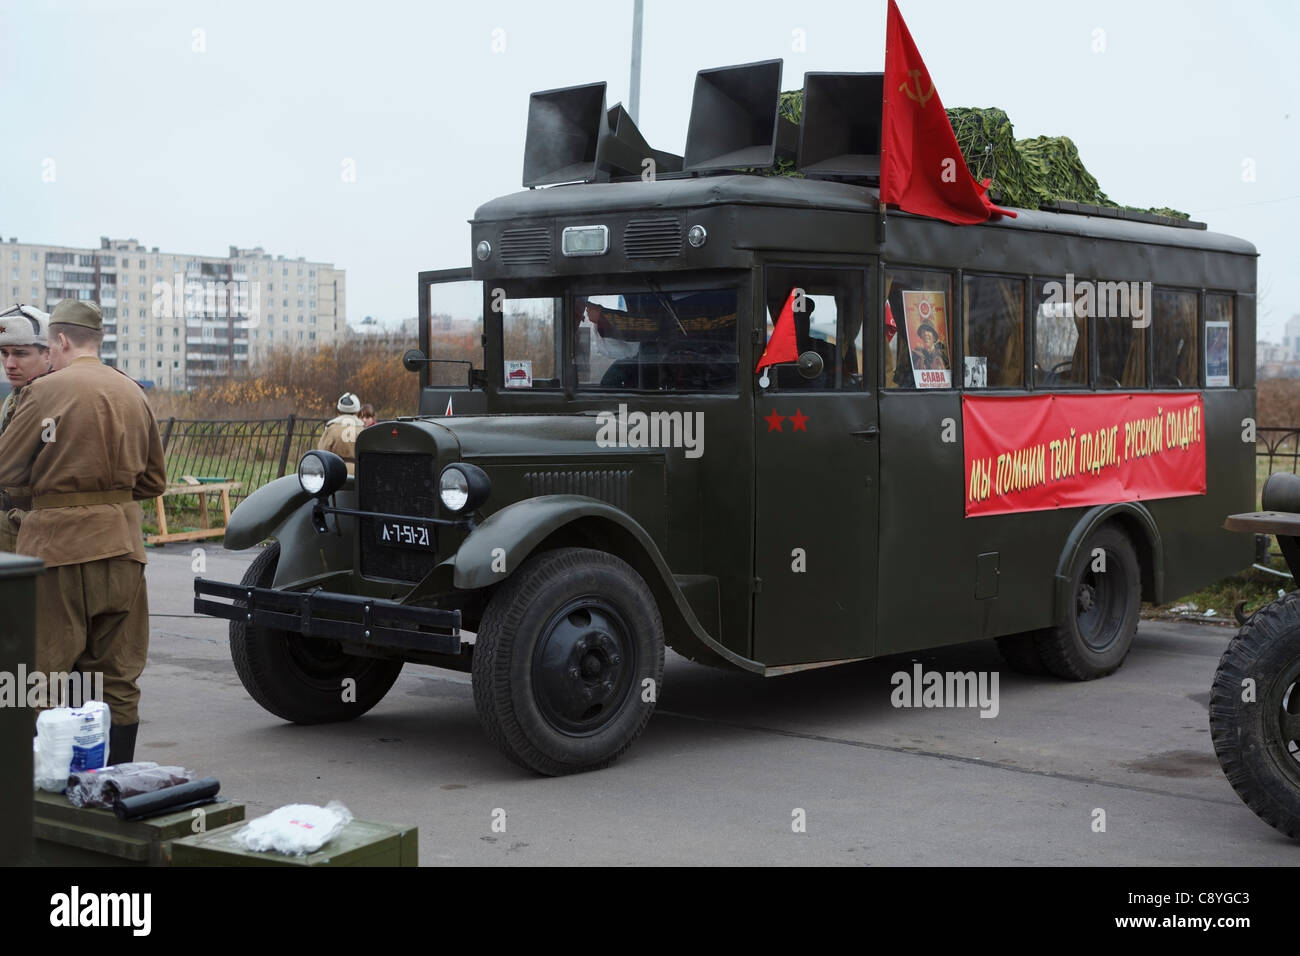 Soviet bus GAS-03-30 with red flags on November 4, 2011 in Saint-Petersburg, Russia. Stock Photo